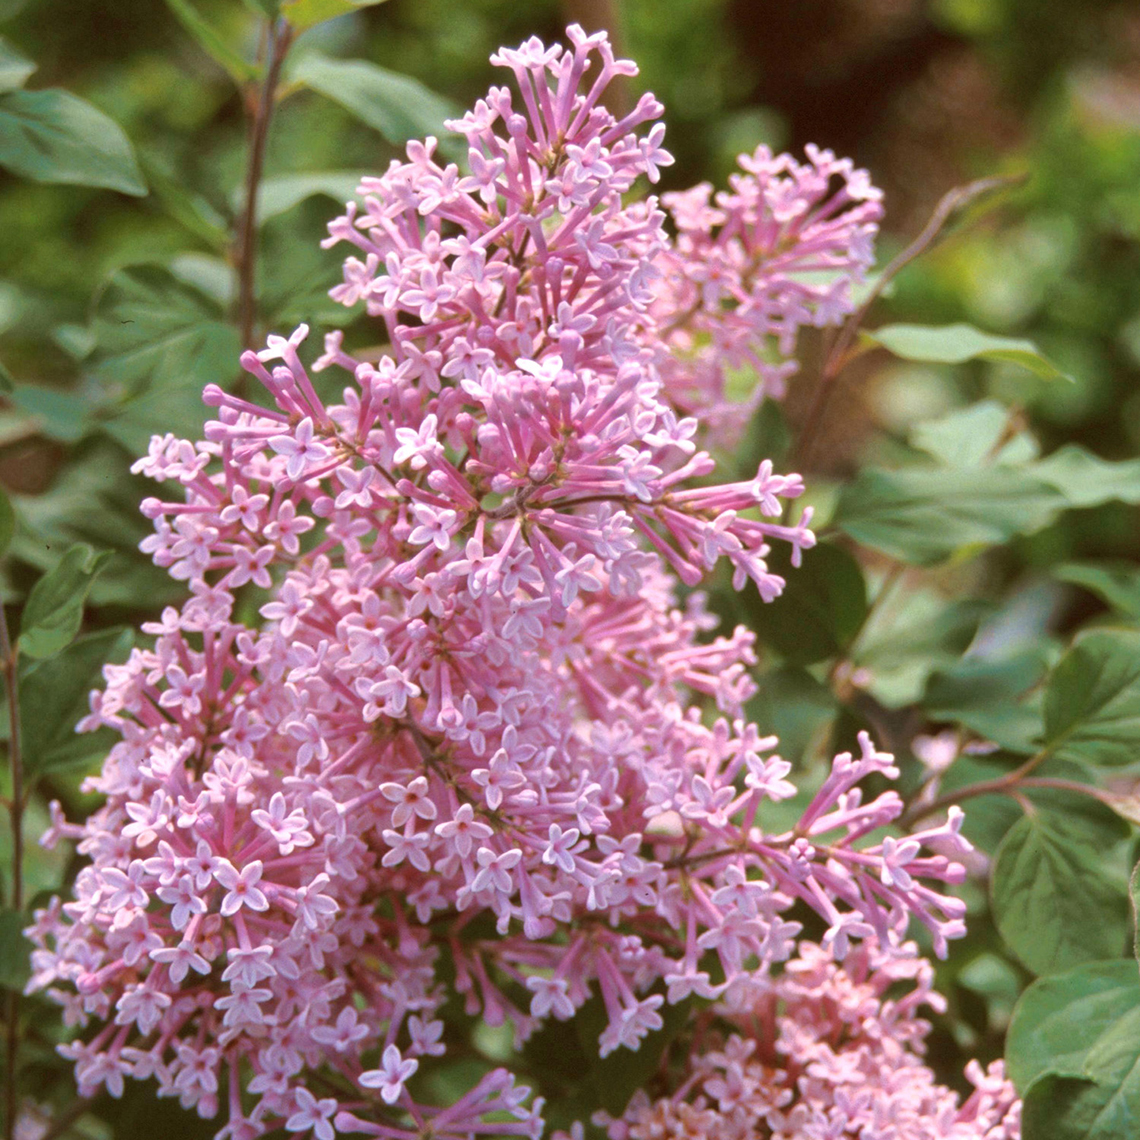 Closeup of the pink blooms of Josee lilac